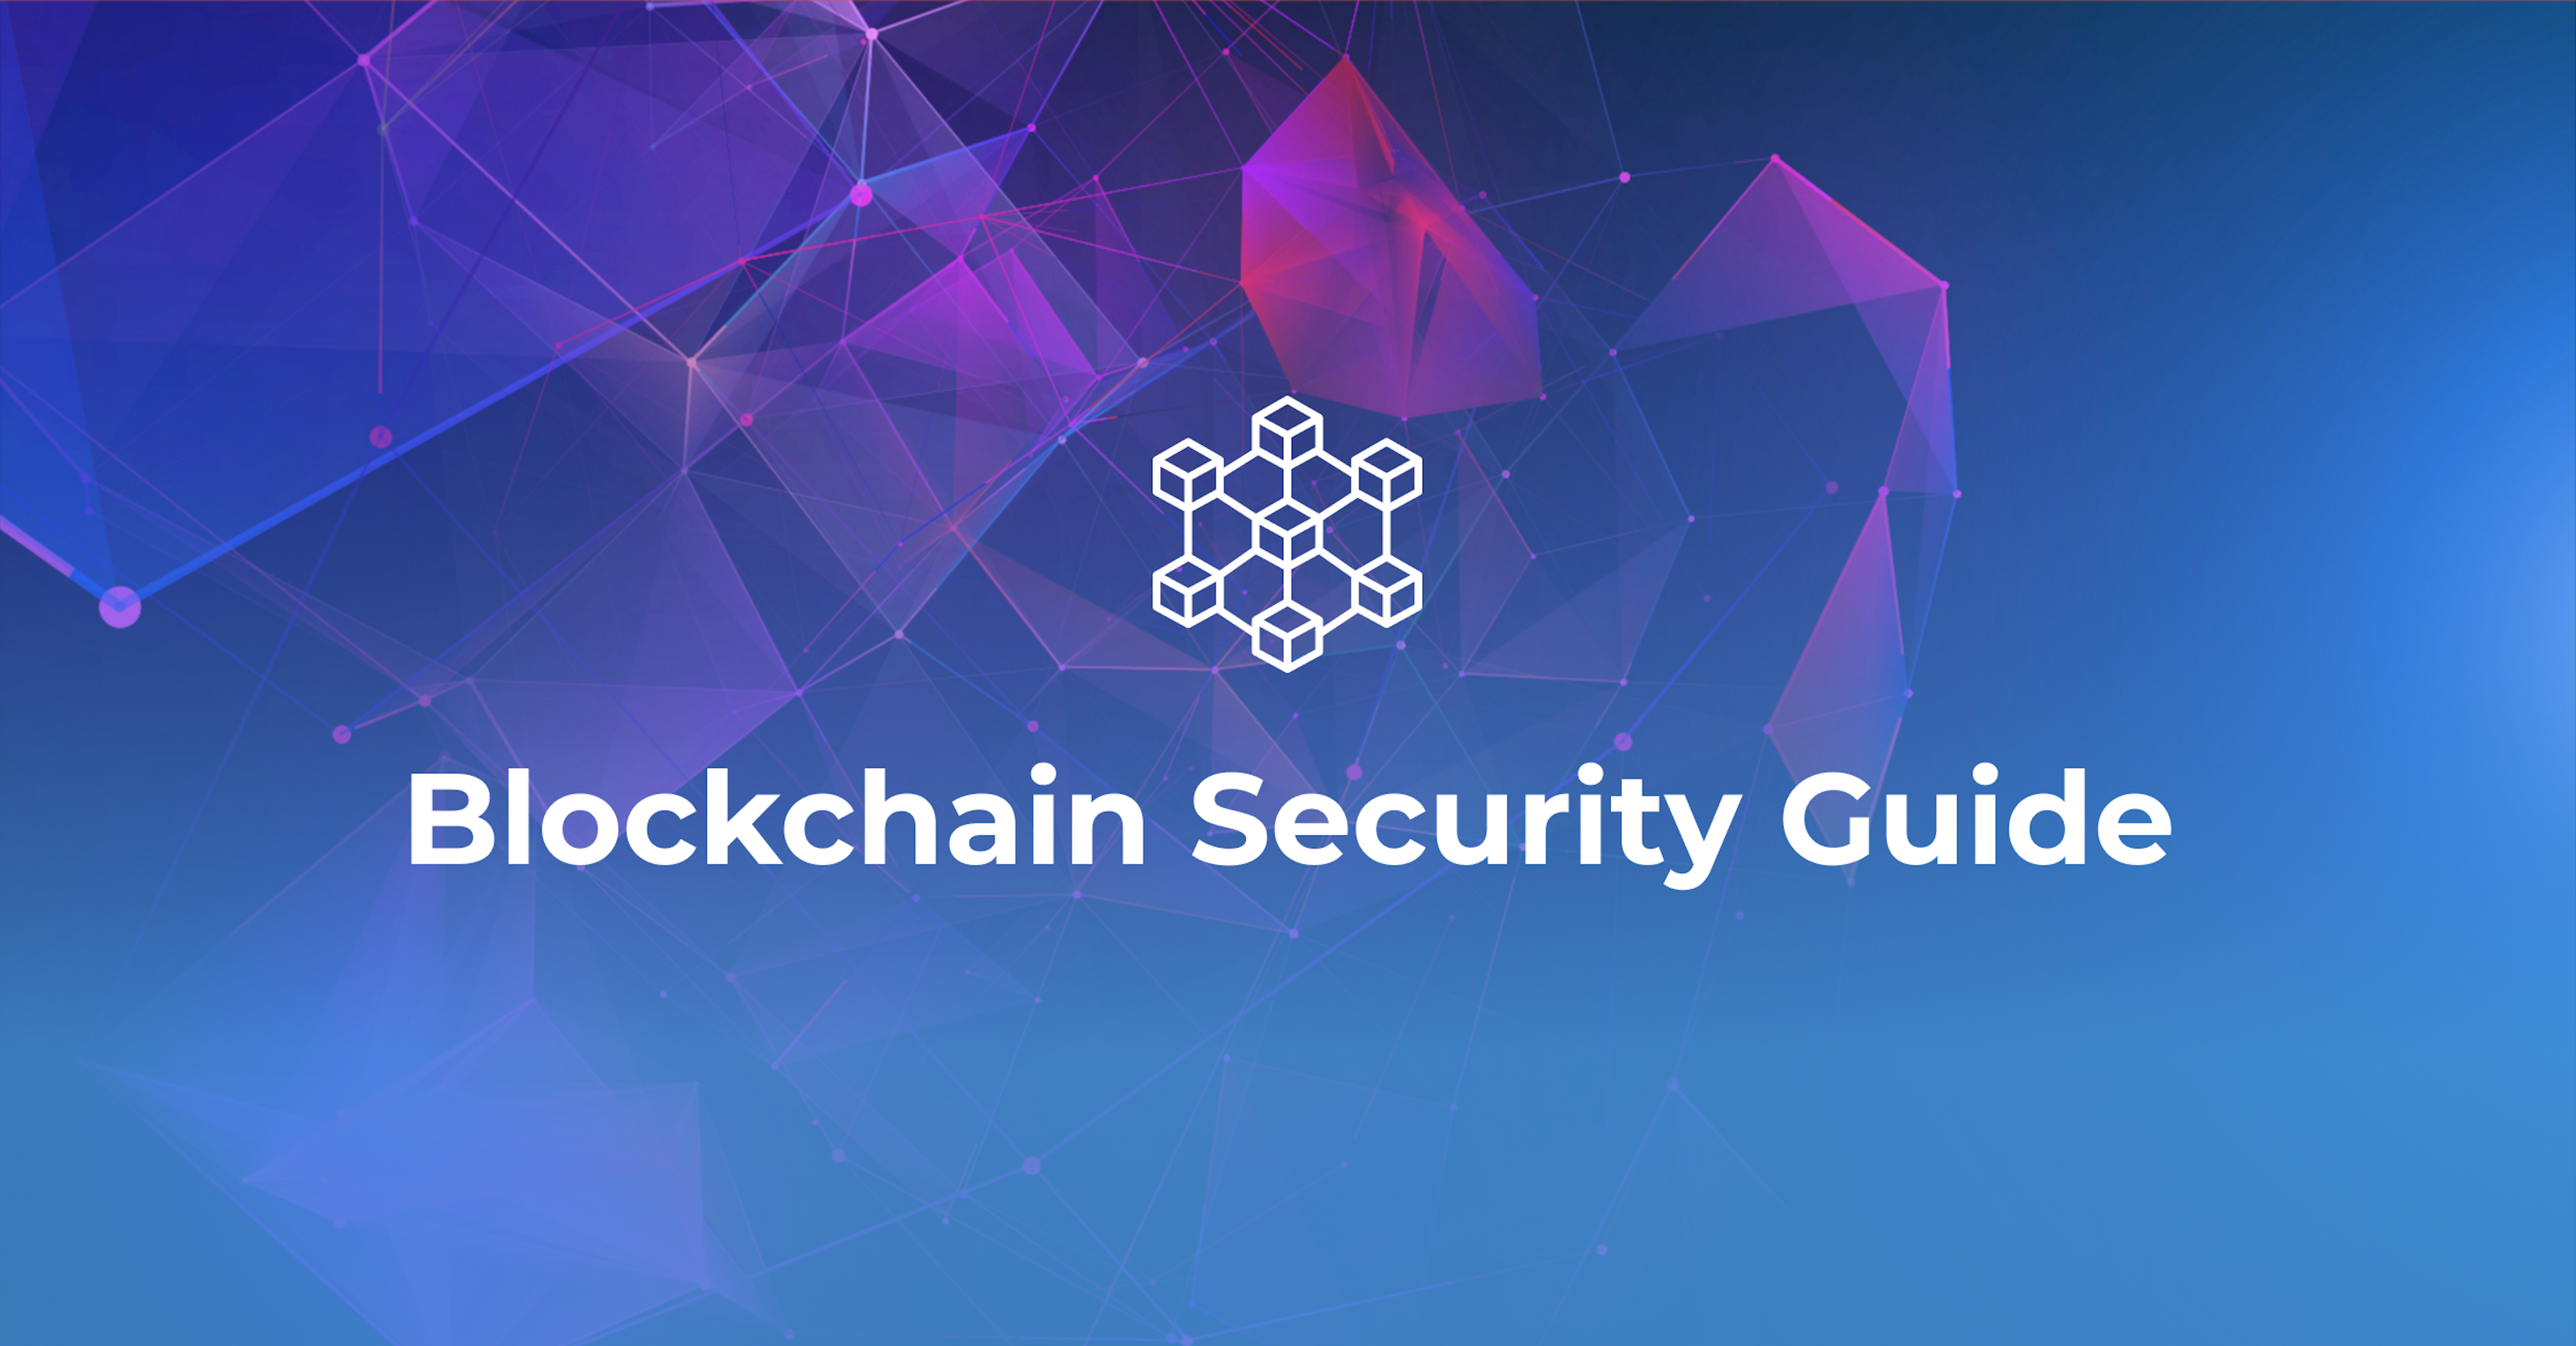 Blockchain Security | A Simple Guide to Understand It